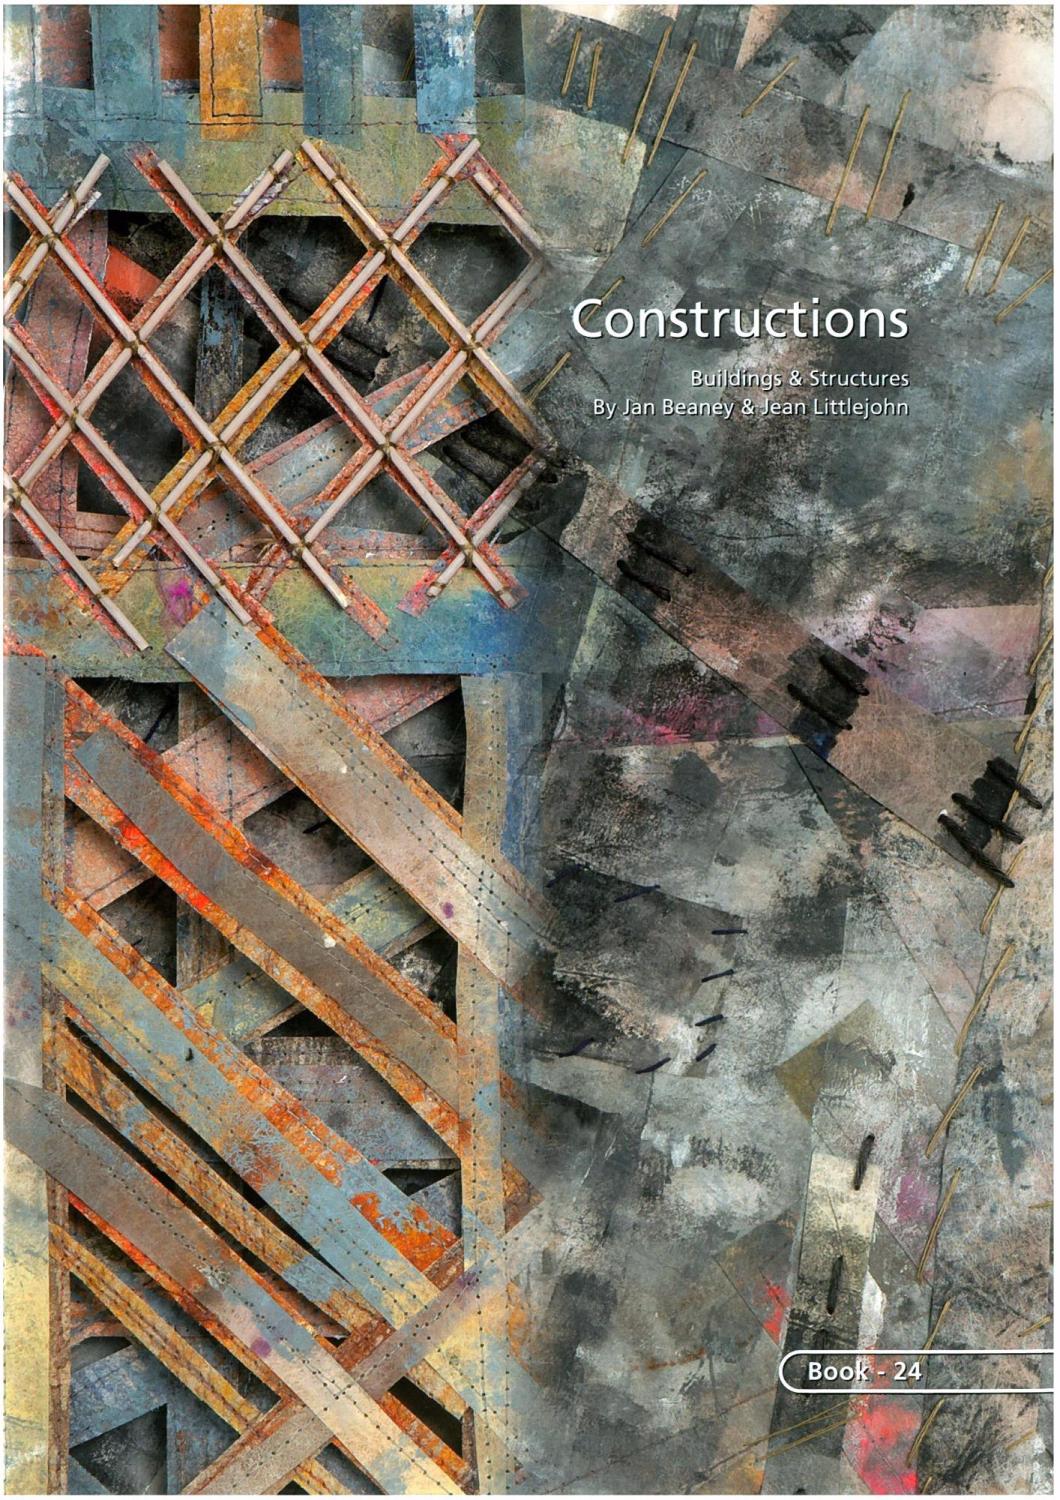 BOOK 24 – CONSTRUCTIONS. By Jan Beaney and Jean Littlejohn